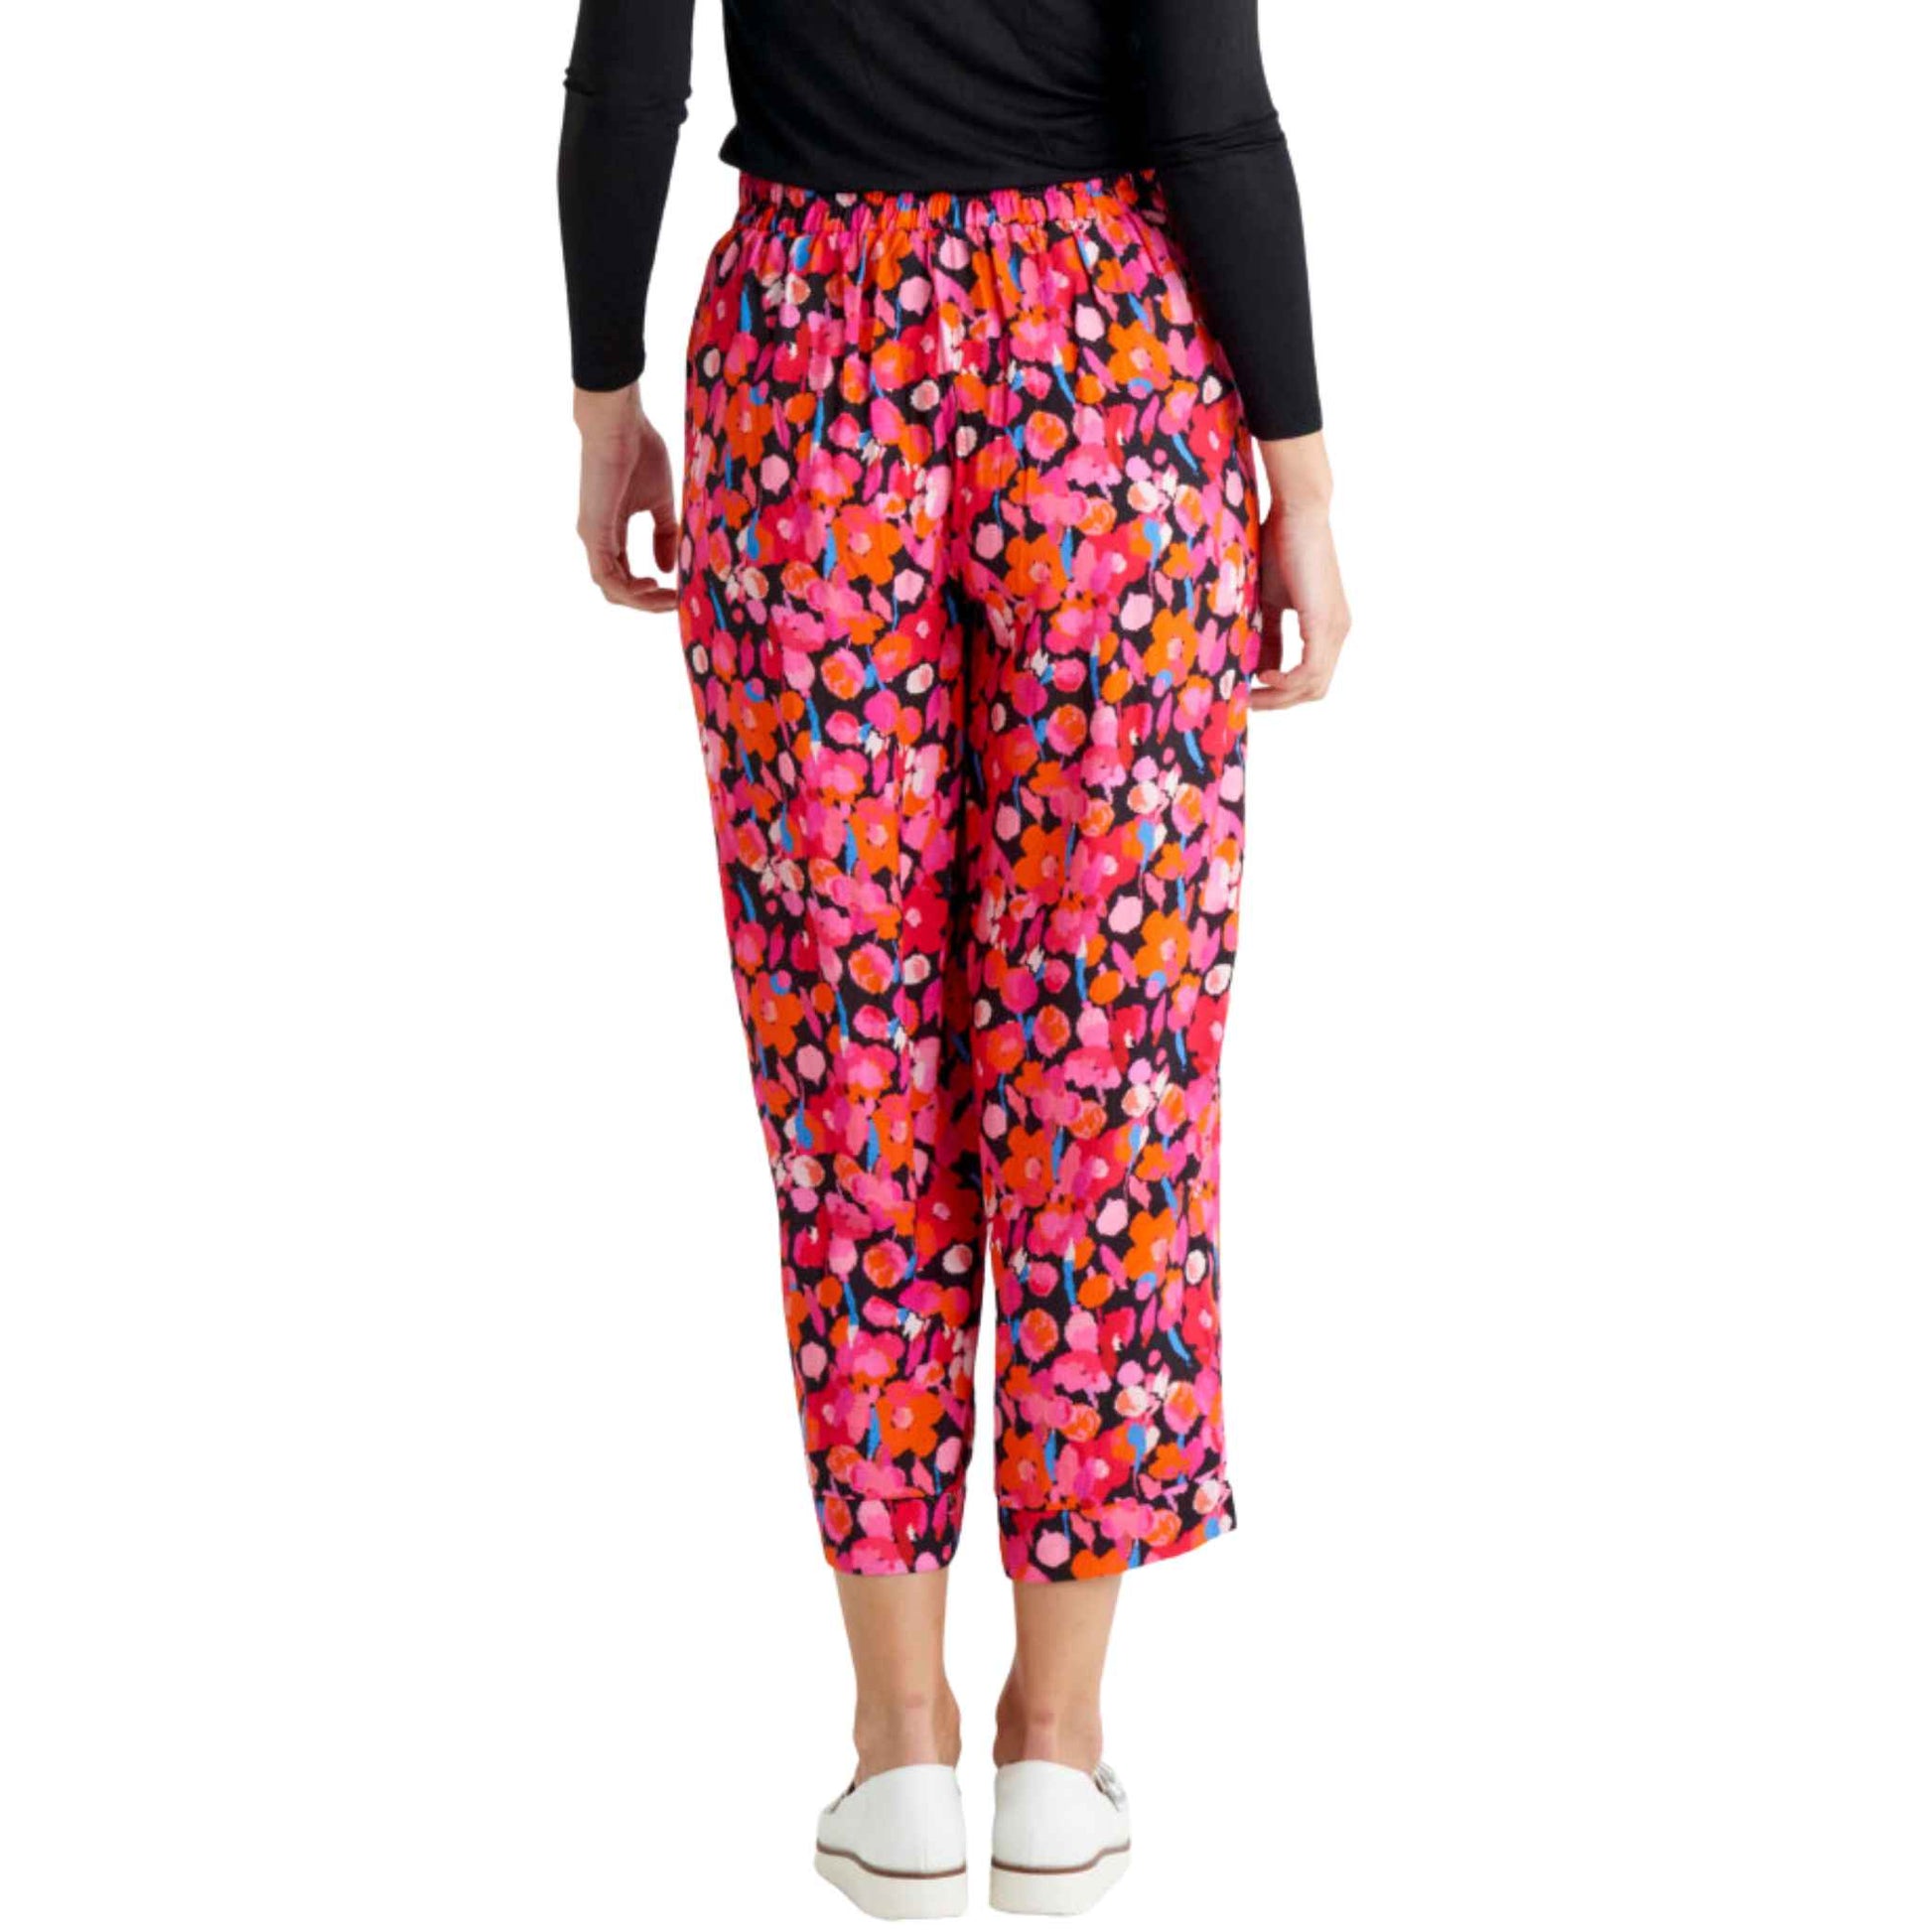 The Sarah pant from Betty Basics feature a flat front elastic waistband ensuring a snug and comfortable fit. With a relaxed fit from the hip to the leg, these pants offer a laid-back vibe. Plus, they come with pockets for added functionality. With a  beautiful pink and orange all over flower print  the Sarah pants are a stand out